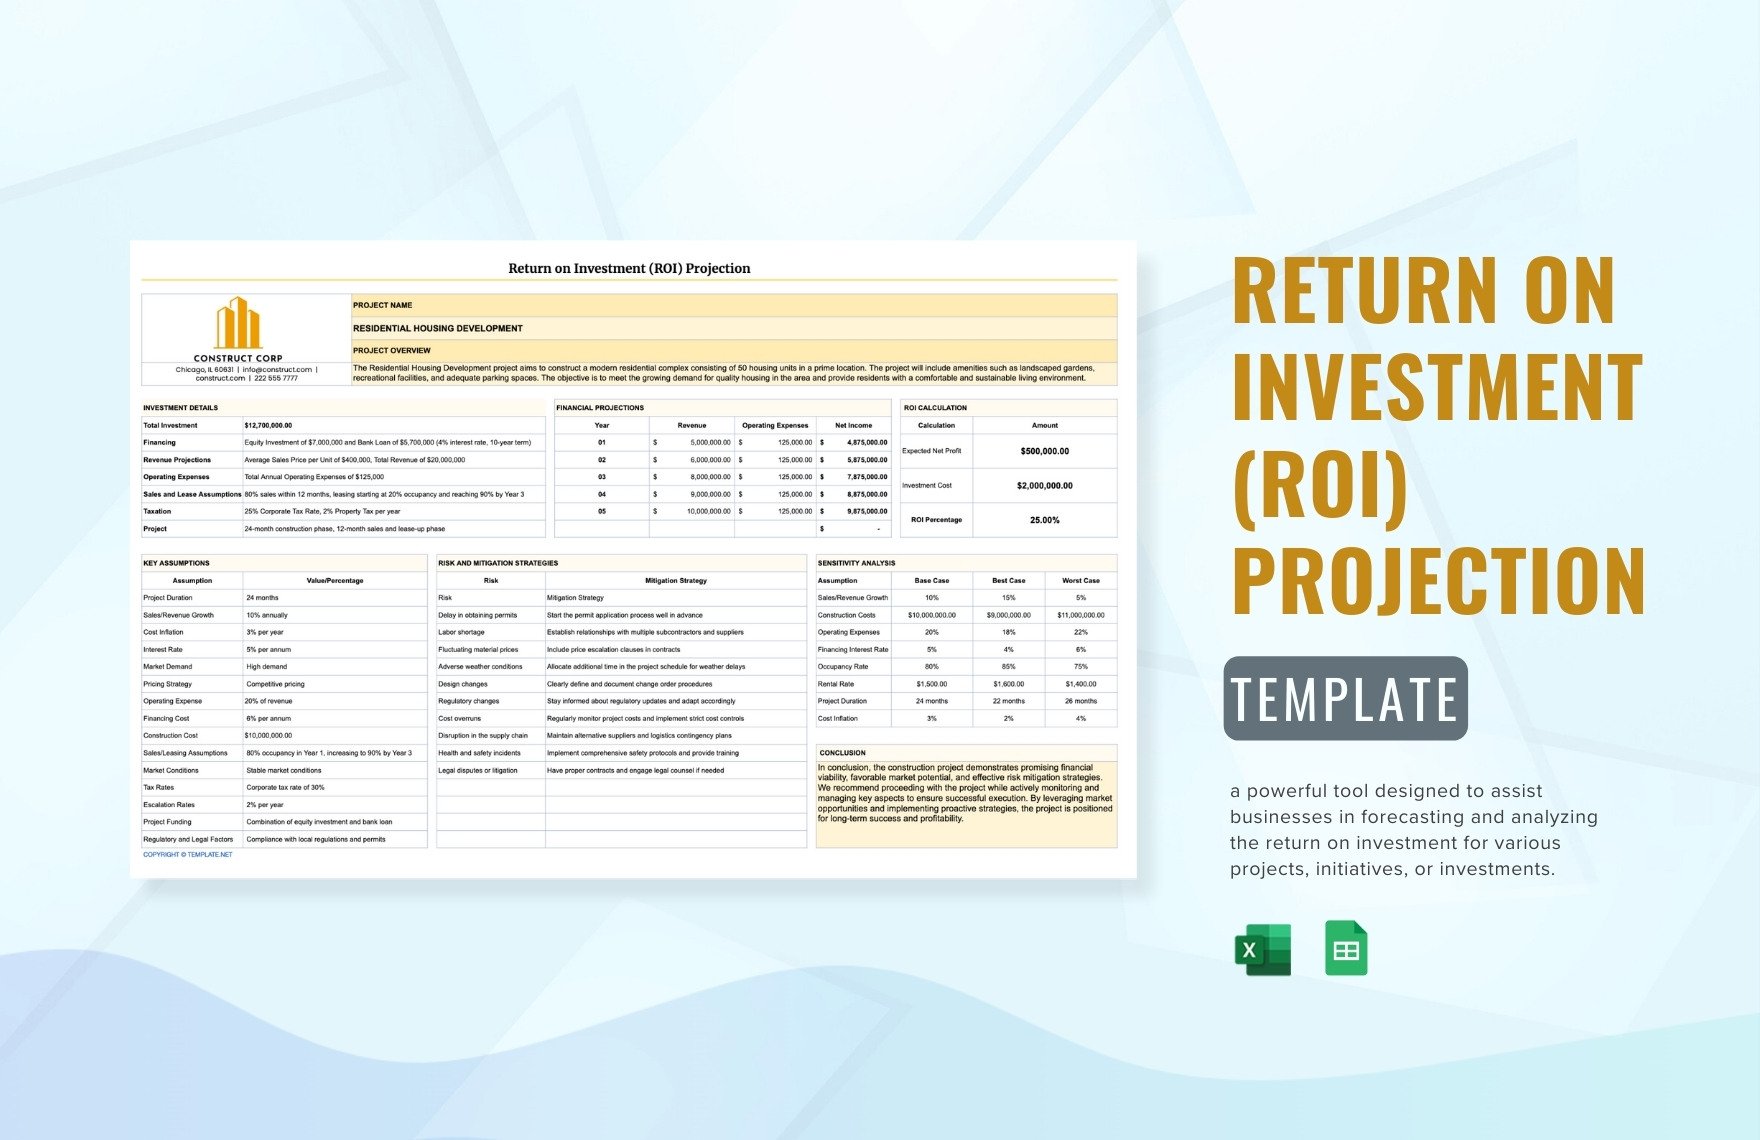 Return on Investment (ROI) Projection Template